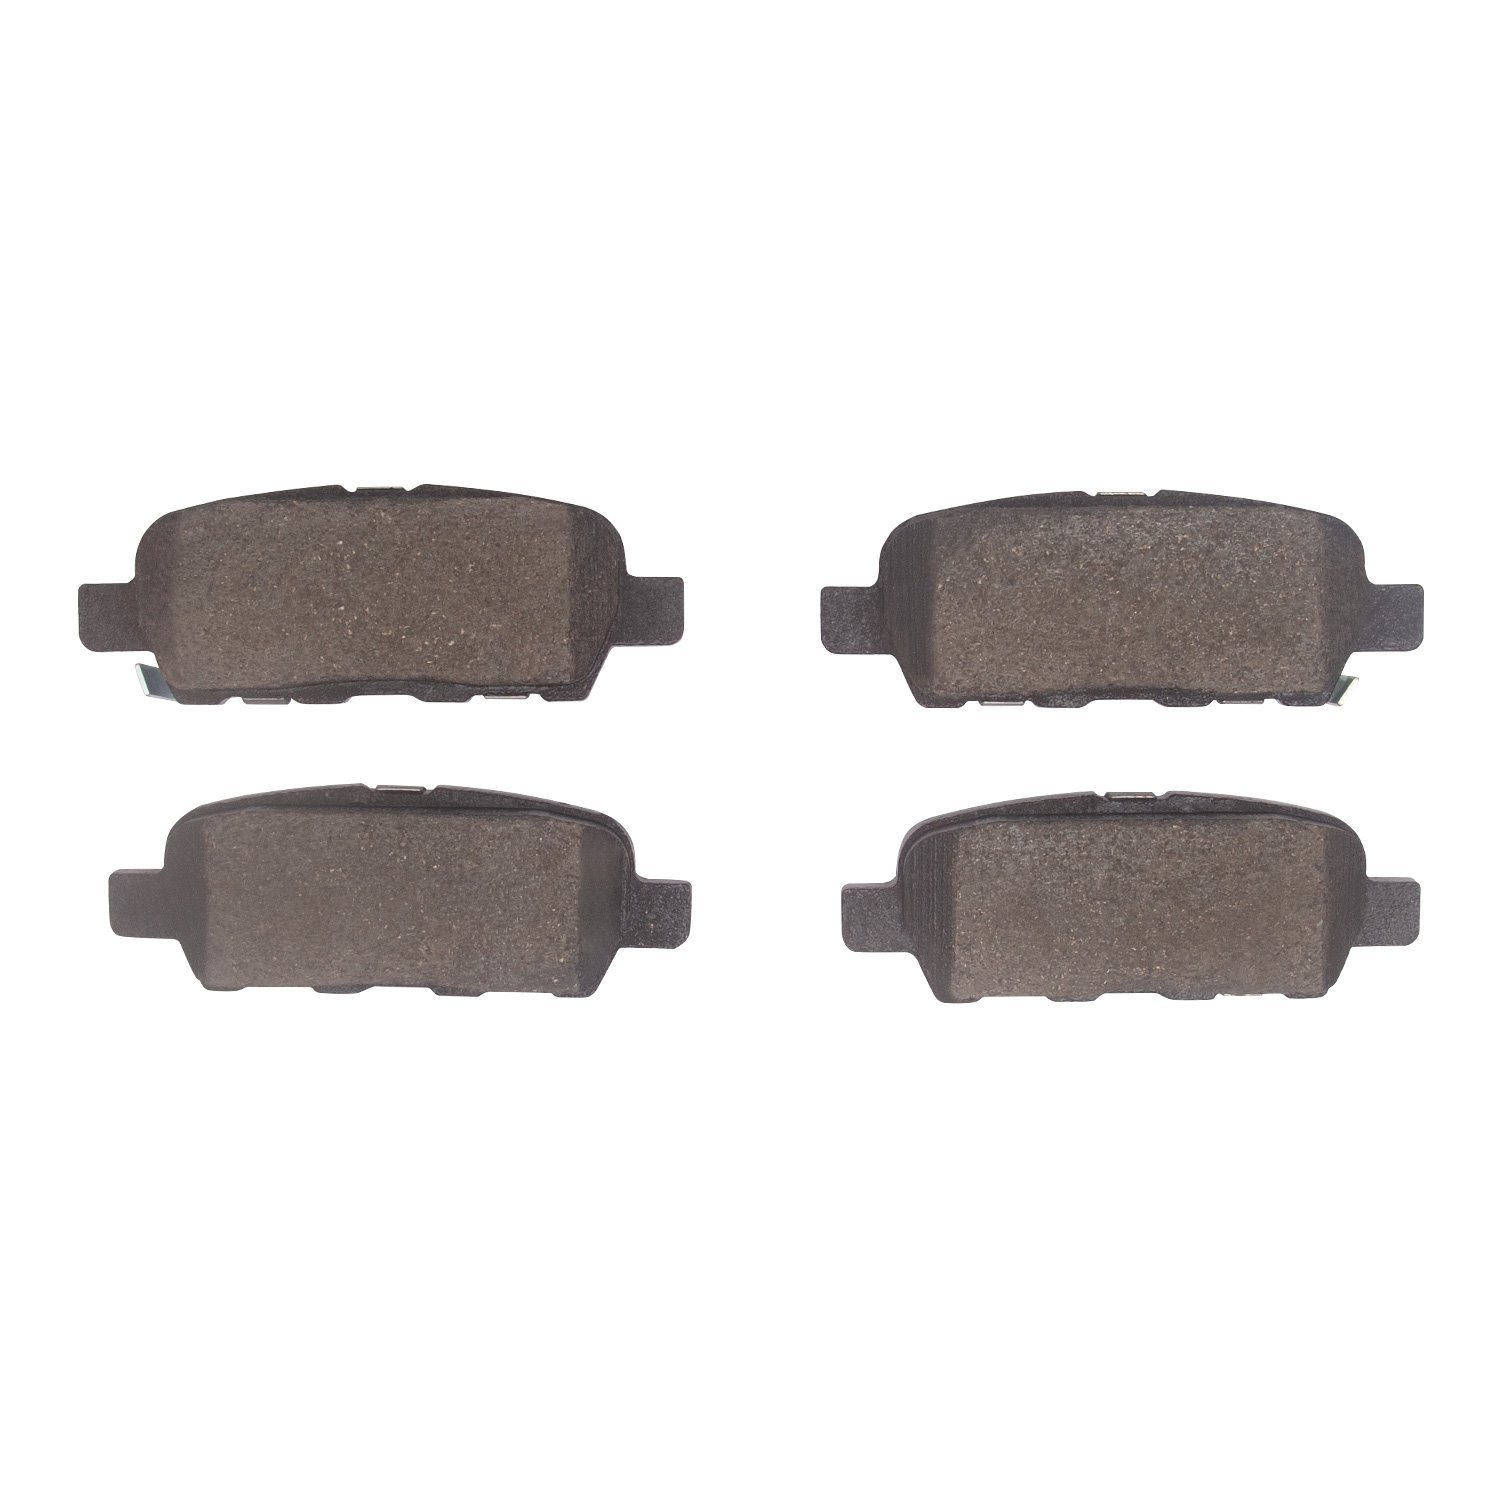 Performance Sport Brake Pads, Fits Select Fits Multiple Makes/Models, Position: Rear